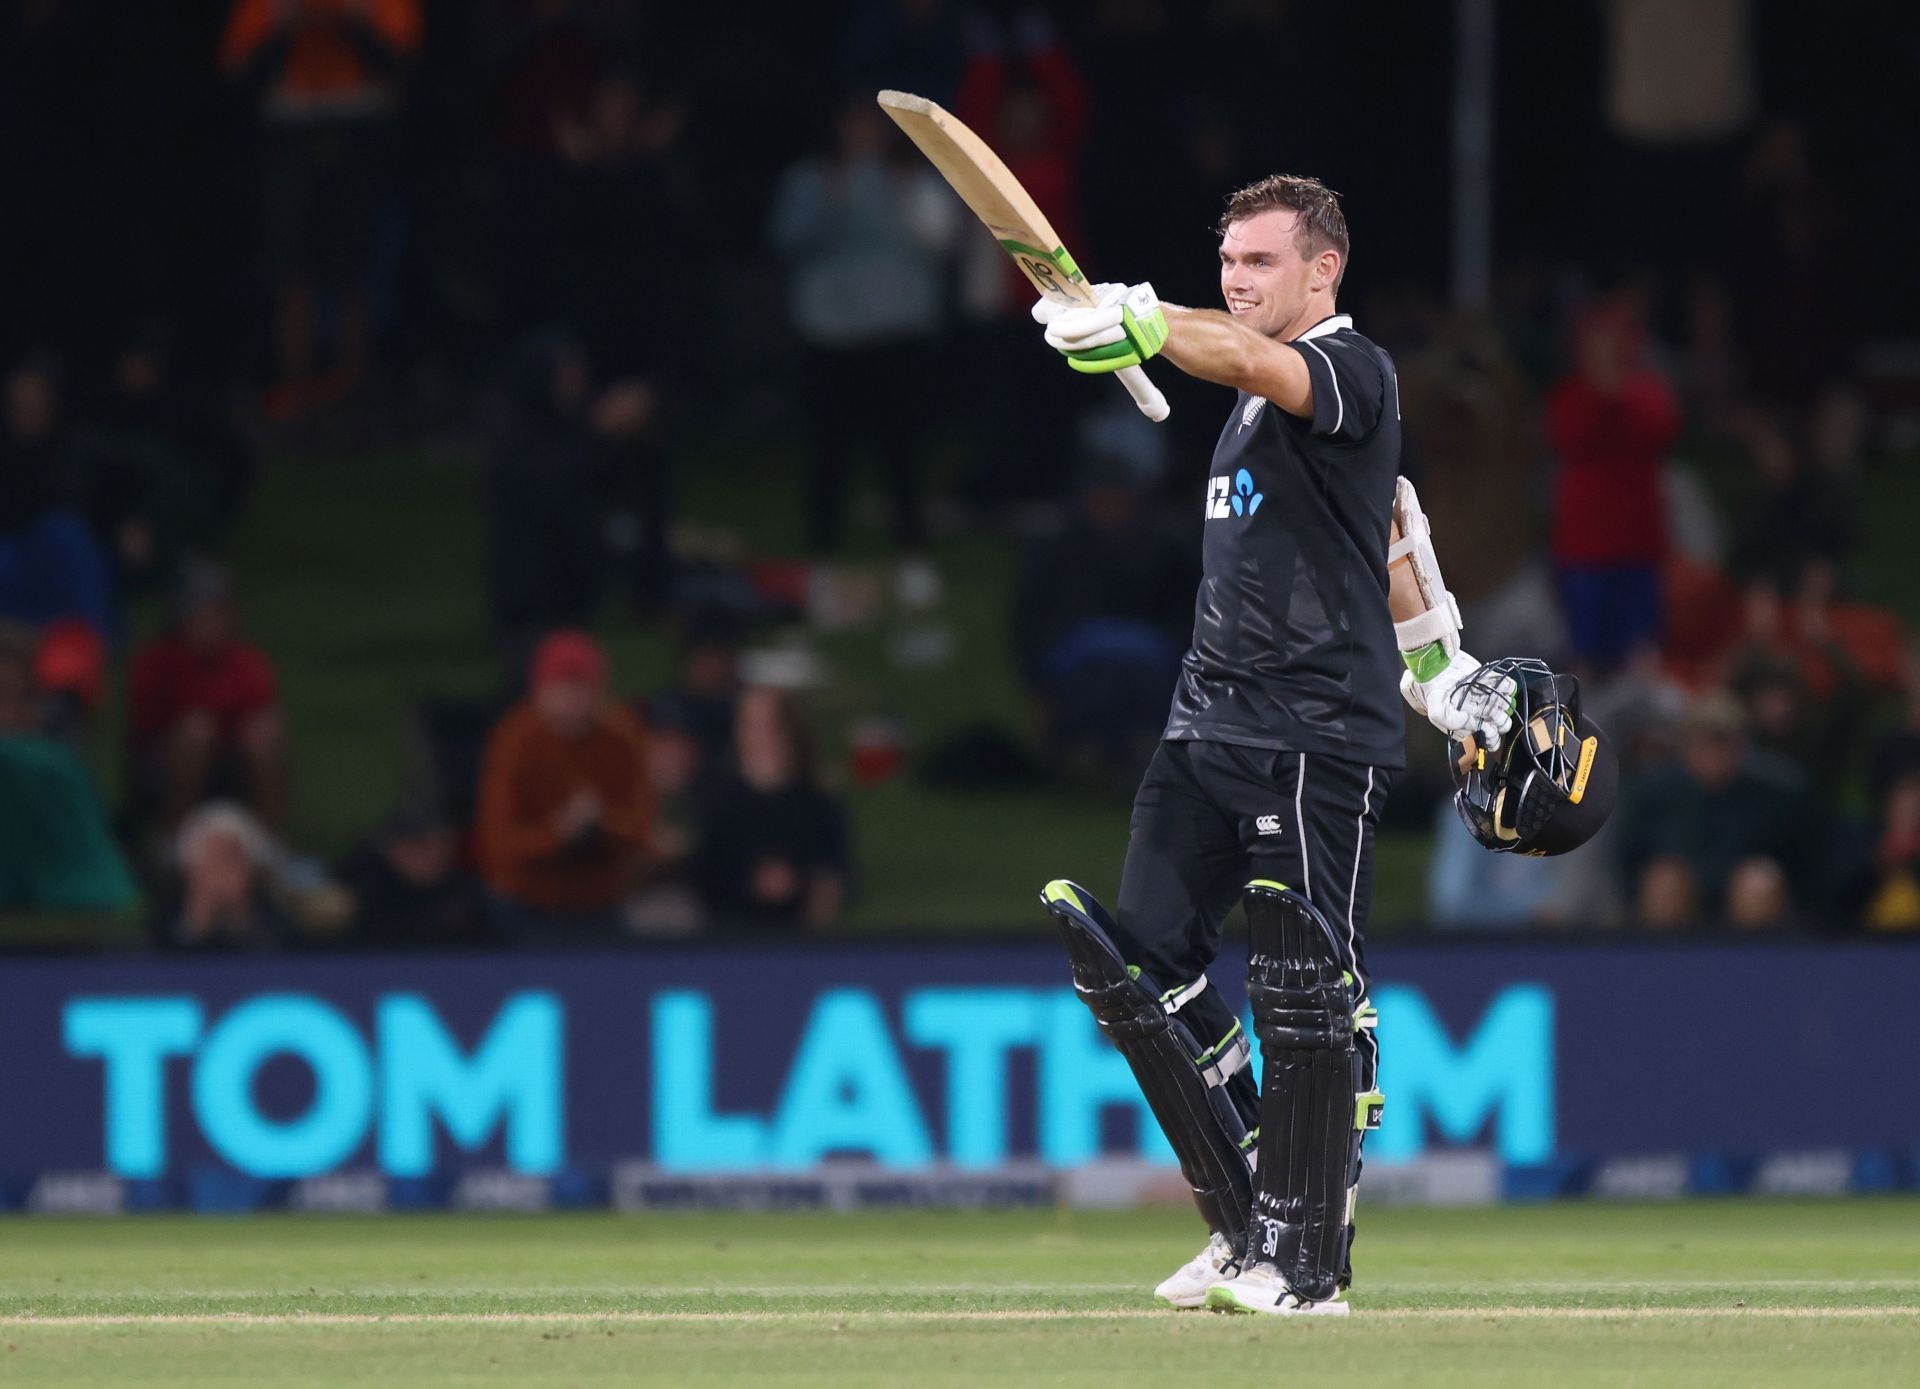 Tom Latham will lead New Zealand against the Netherlands in the absence of Kane Williamson.